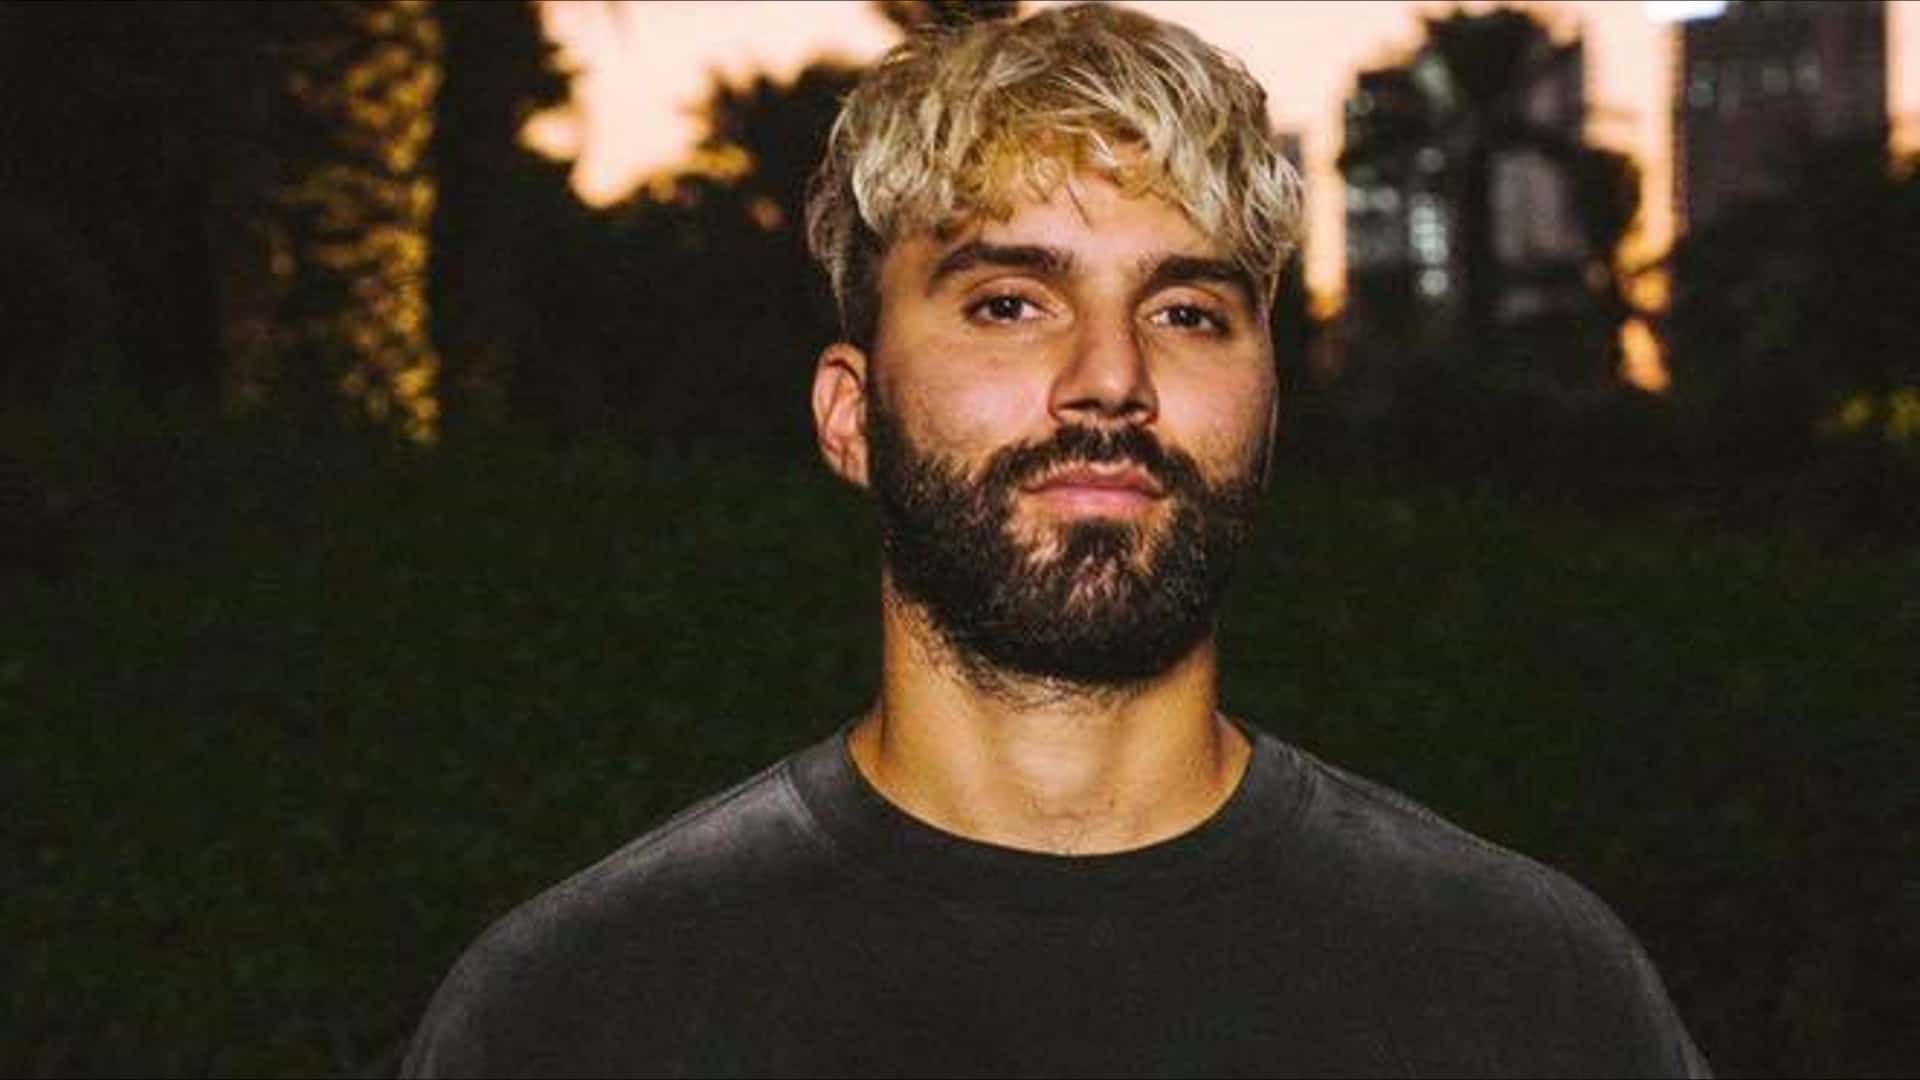 R3HAB comes out with dance and radio crossover, ‘My Pony’: Listen